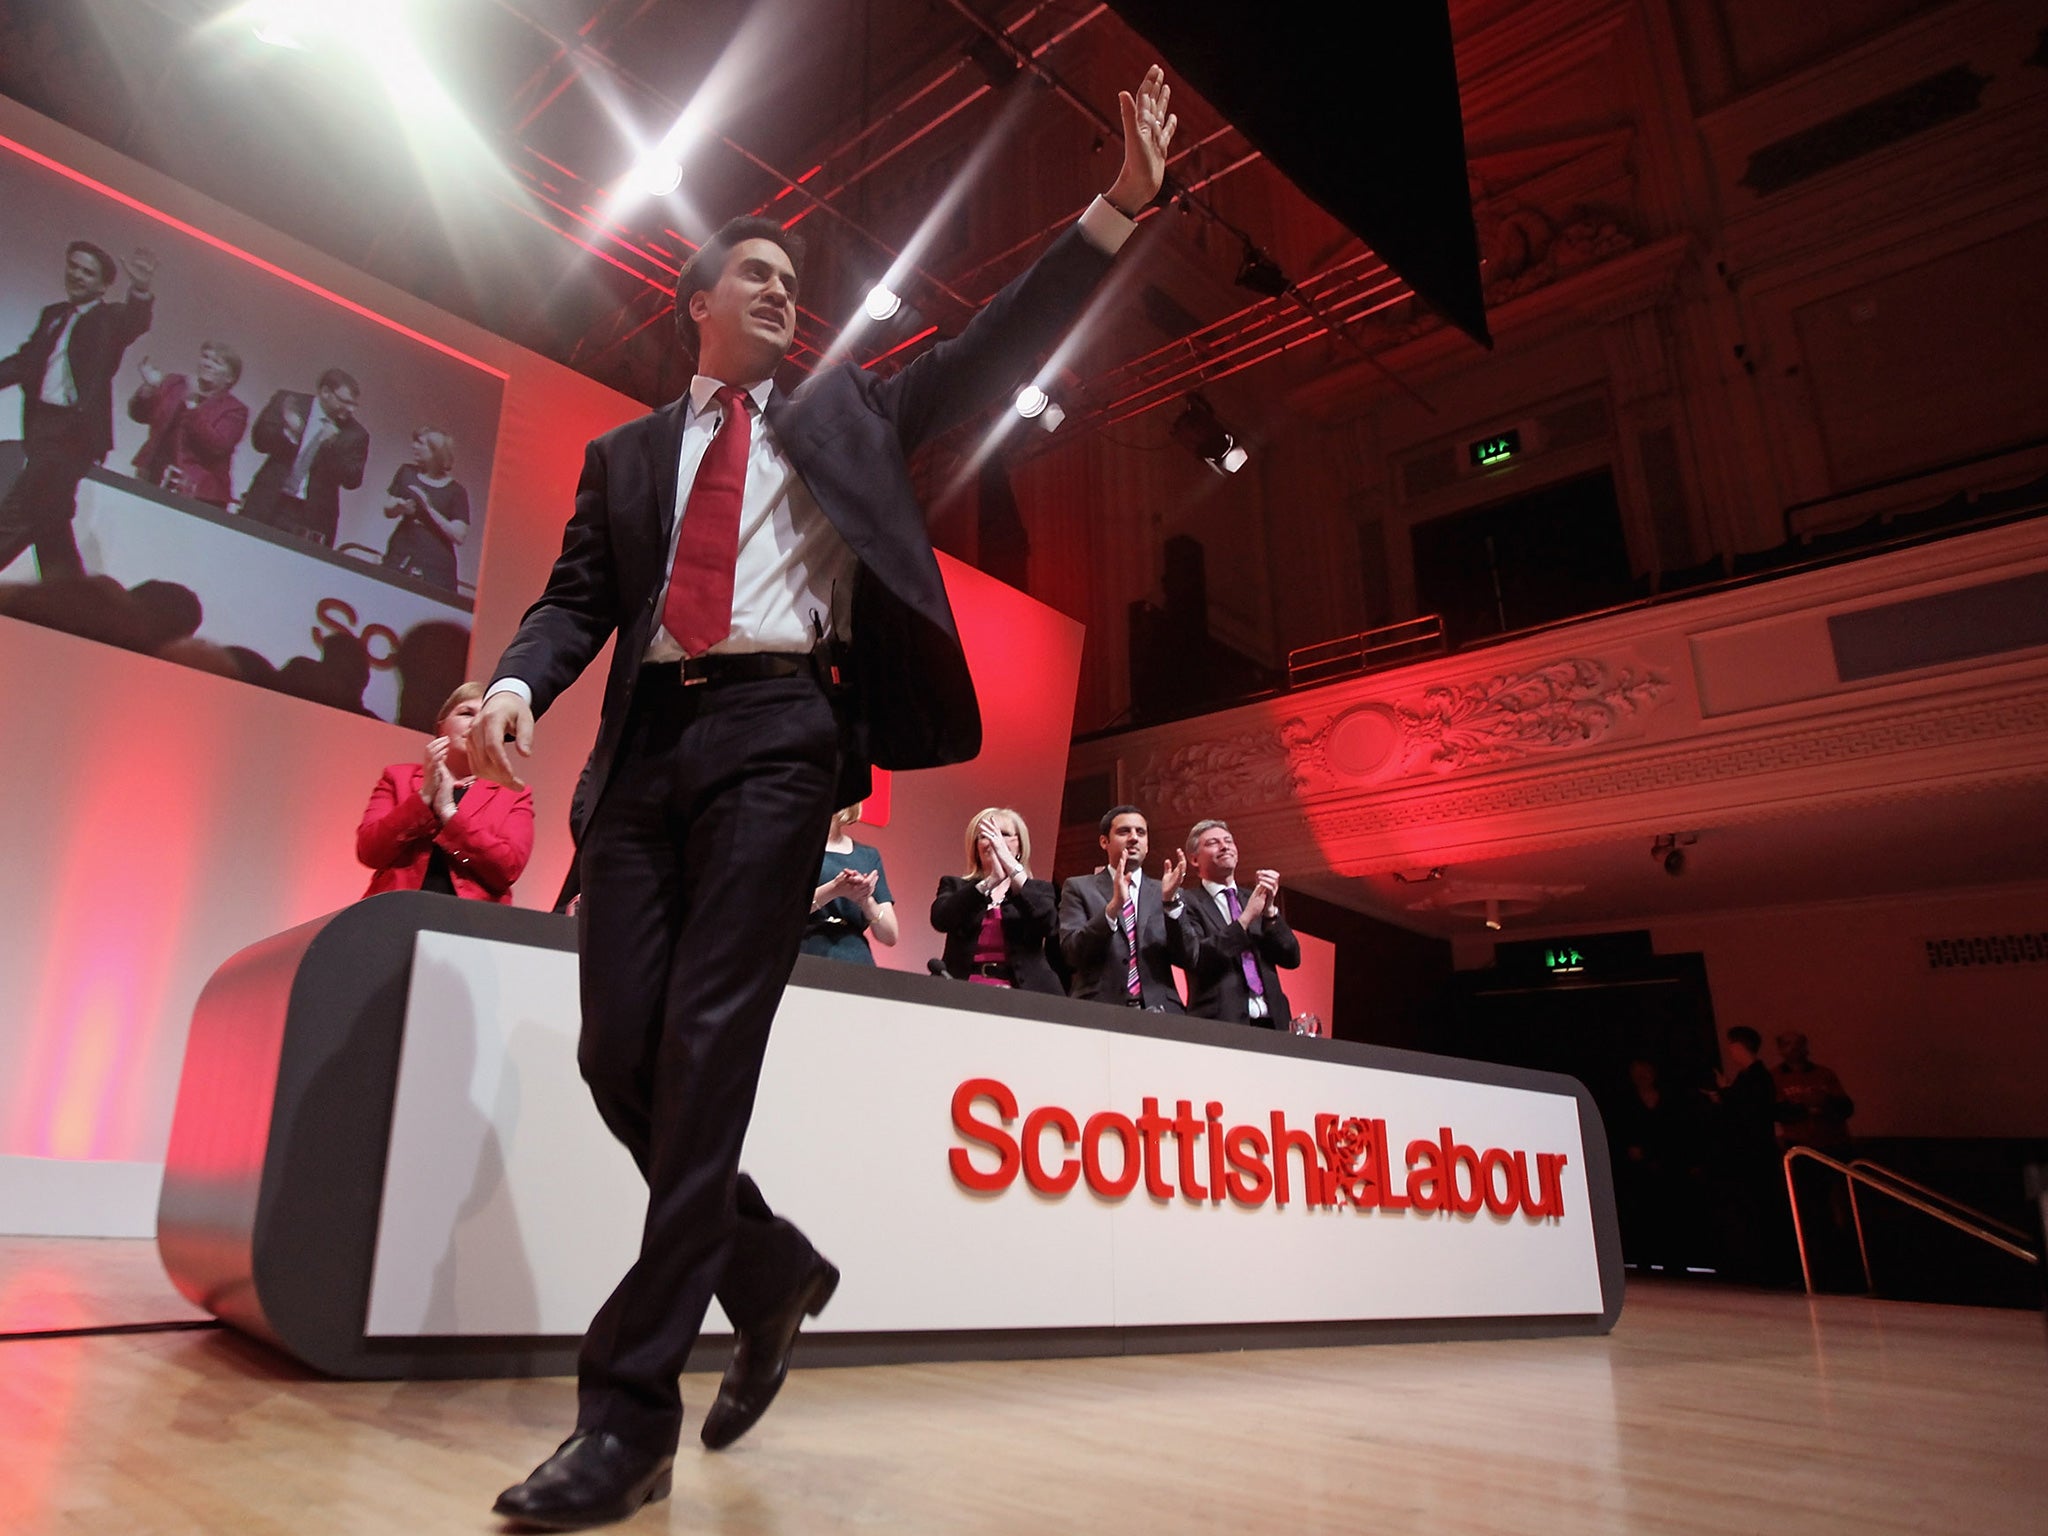 McCann has gone further than Ed Miliband and dismissed the possibility of any Scottish Labour deal with the SNP